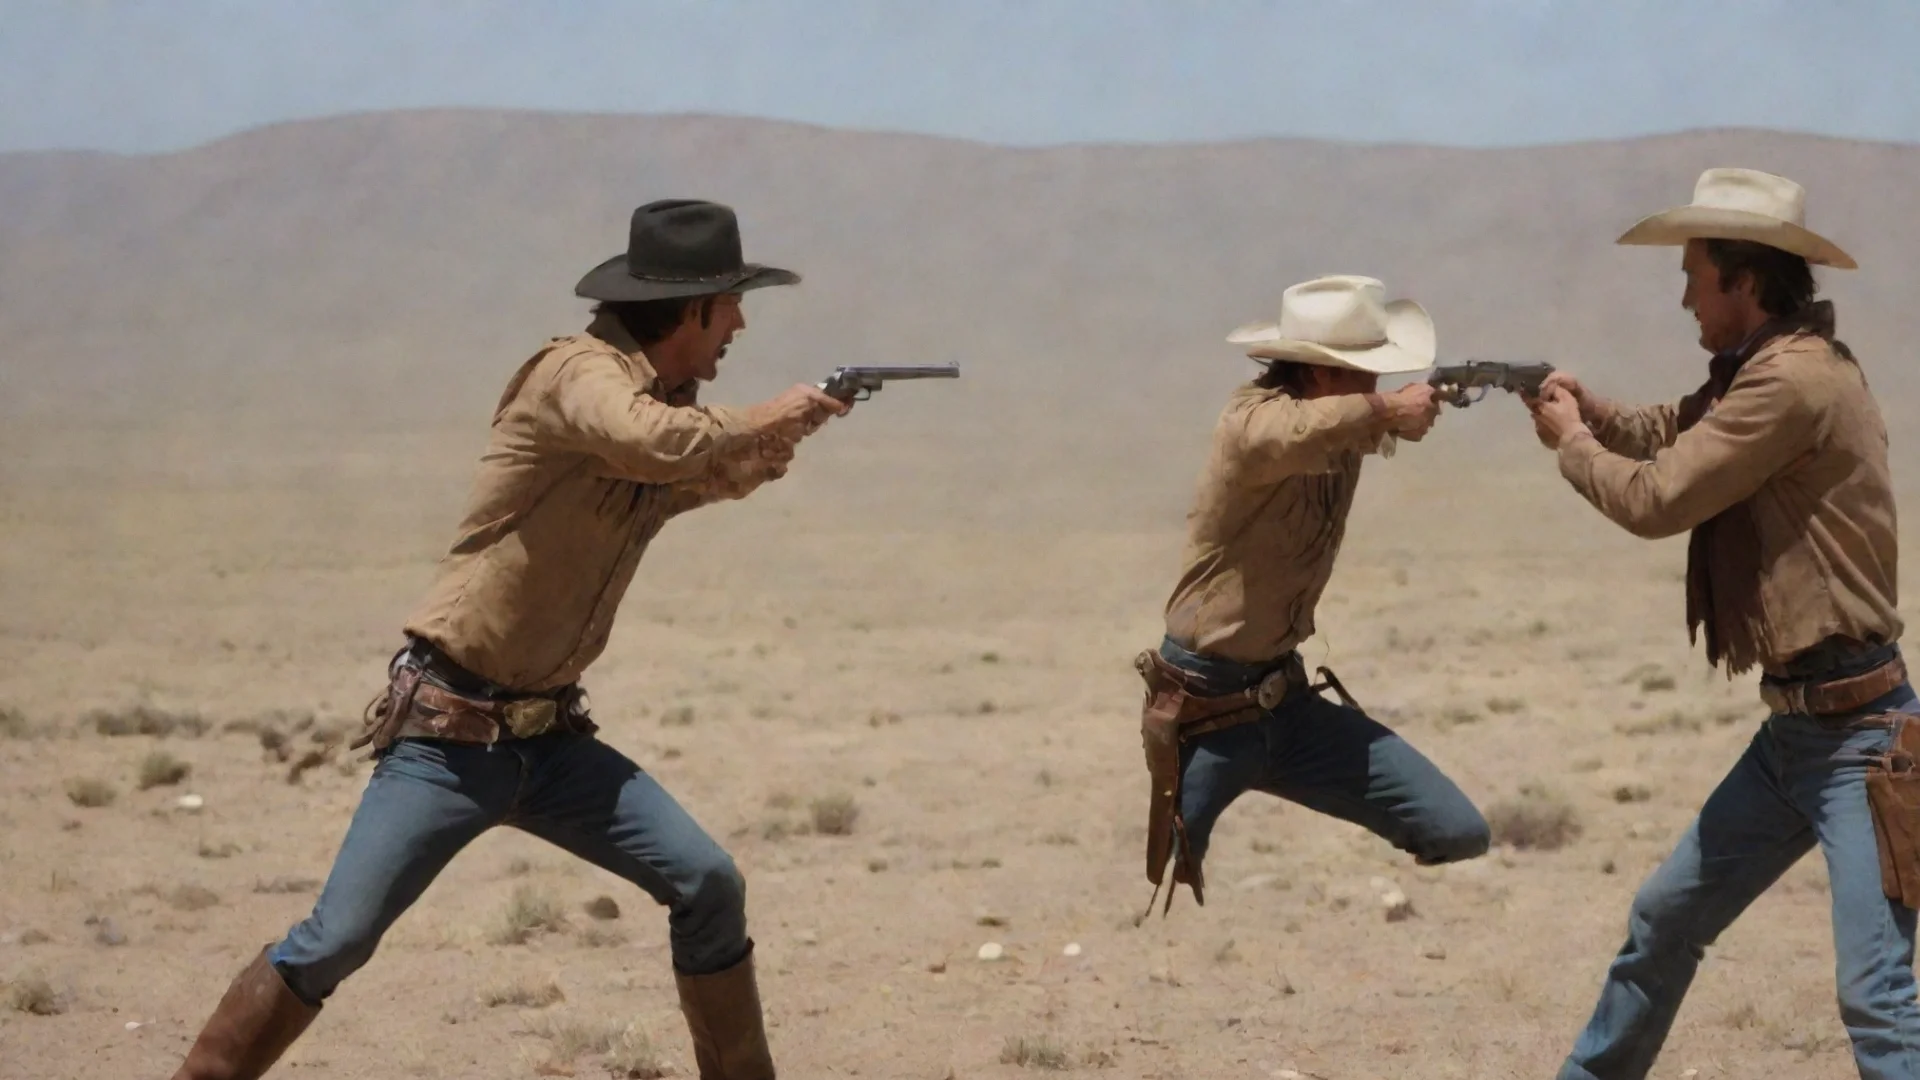 aiamazing two cowboys having a gun duel awesome portrait 2 wide